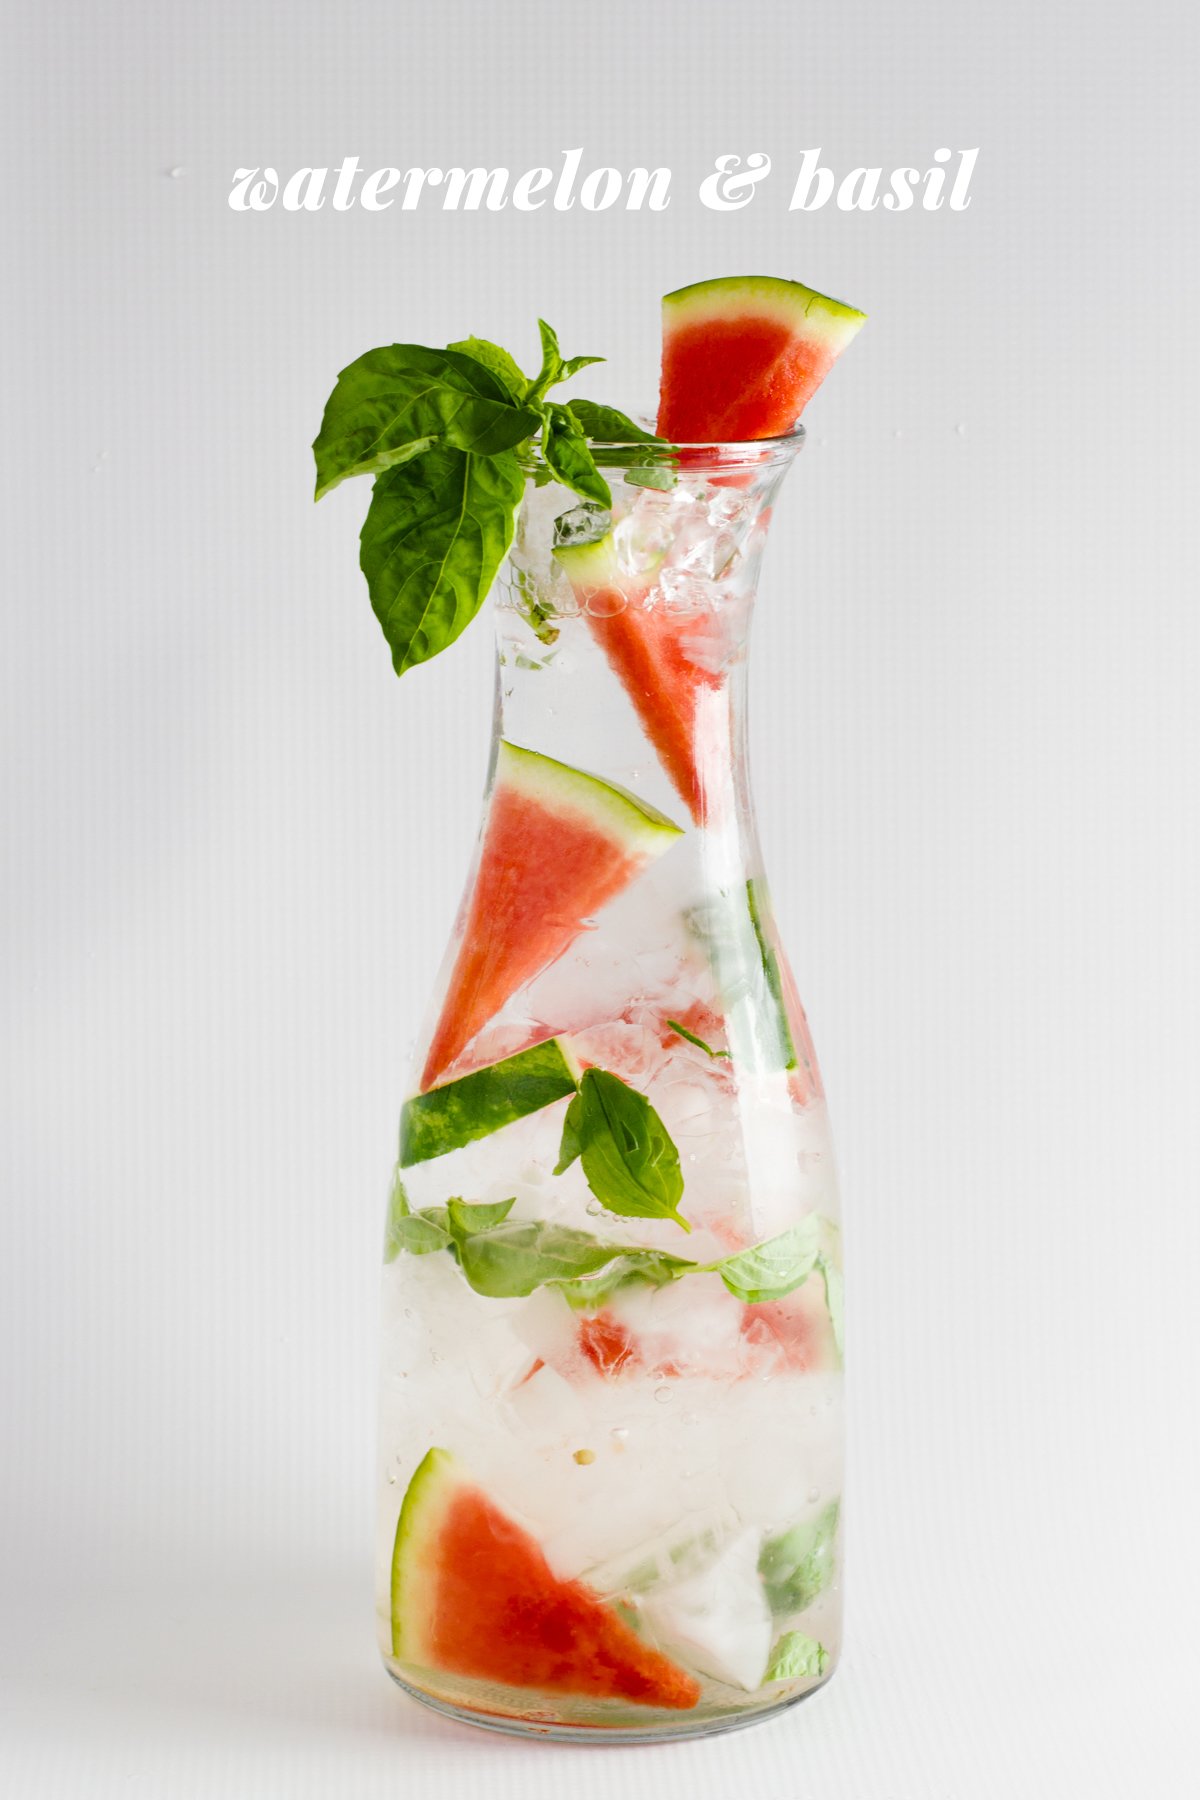 Watermelon and basil infused water is displayed in a glass carafe. A text overlay reads, "Watermelon & Basil."